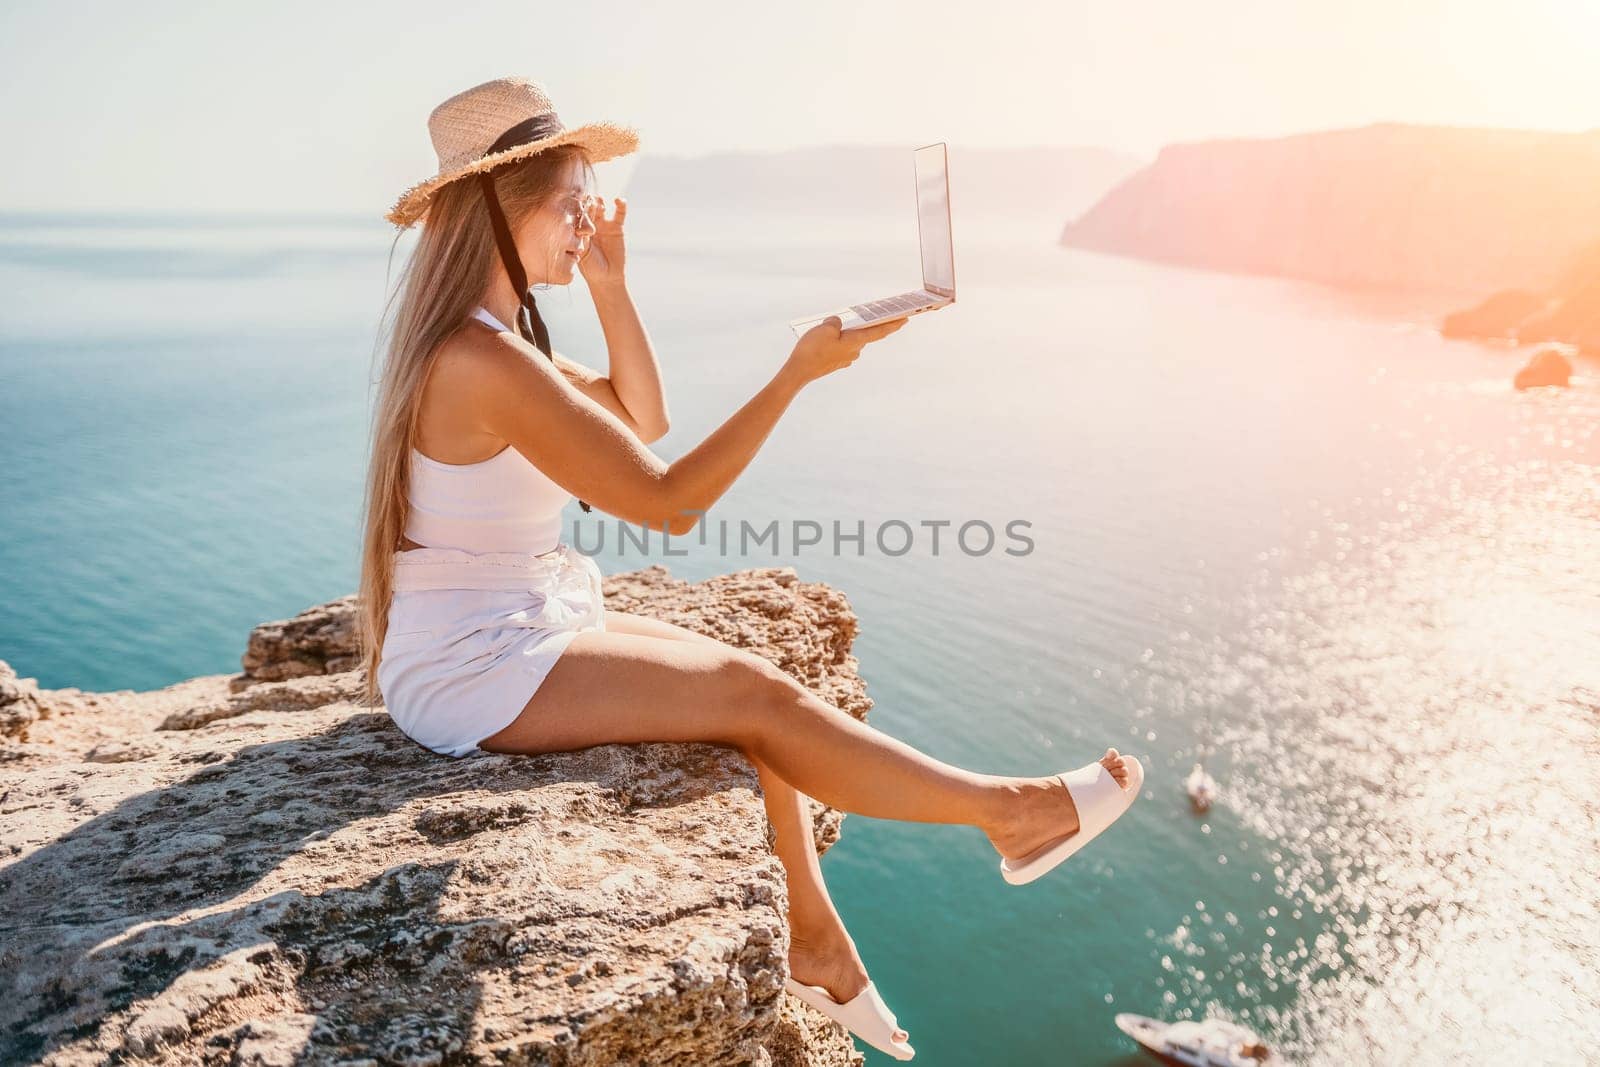 Working remotely on seashore. Happy successful woman female freelancer in straw hat working on laptop by the sea at sunset. Freelance, remote work on vacation